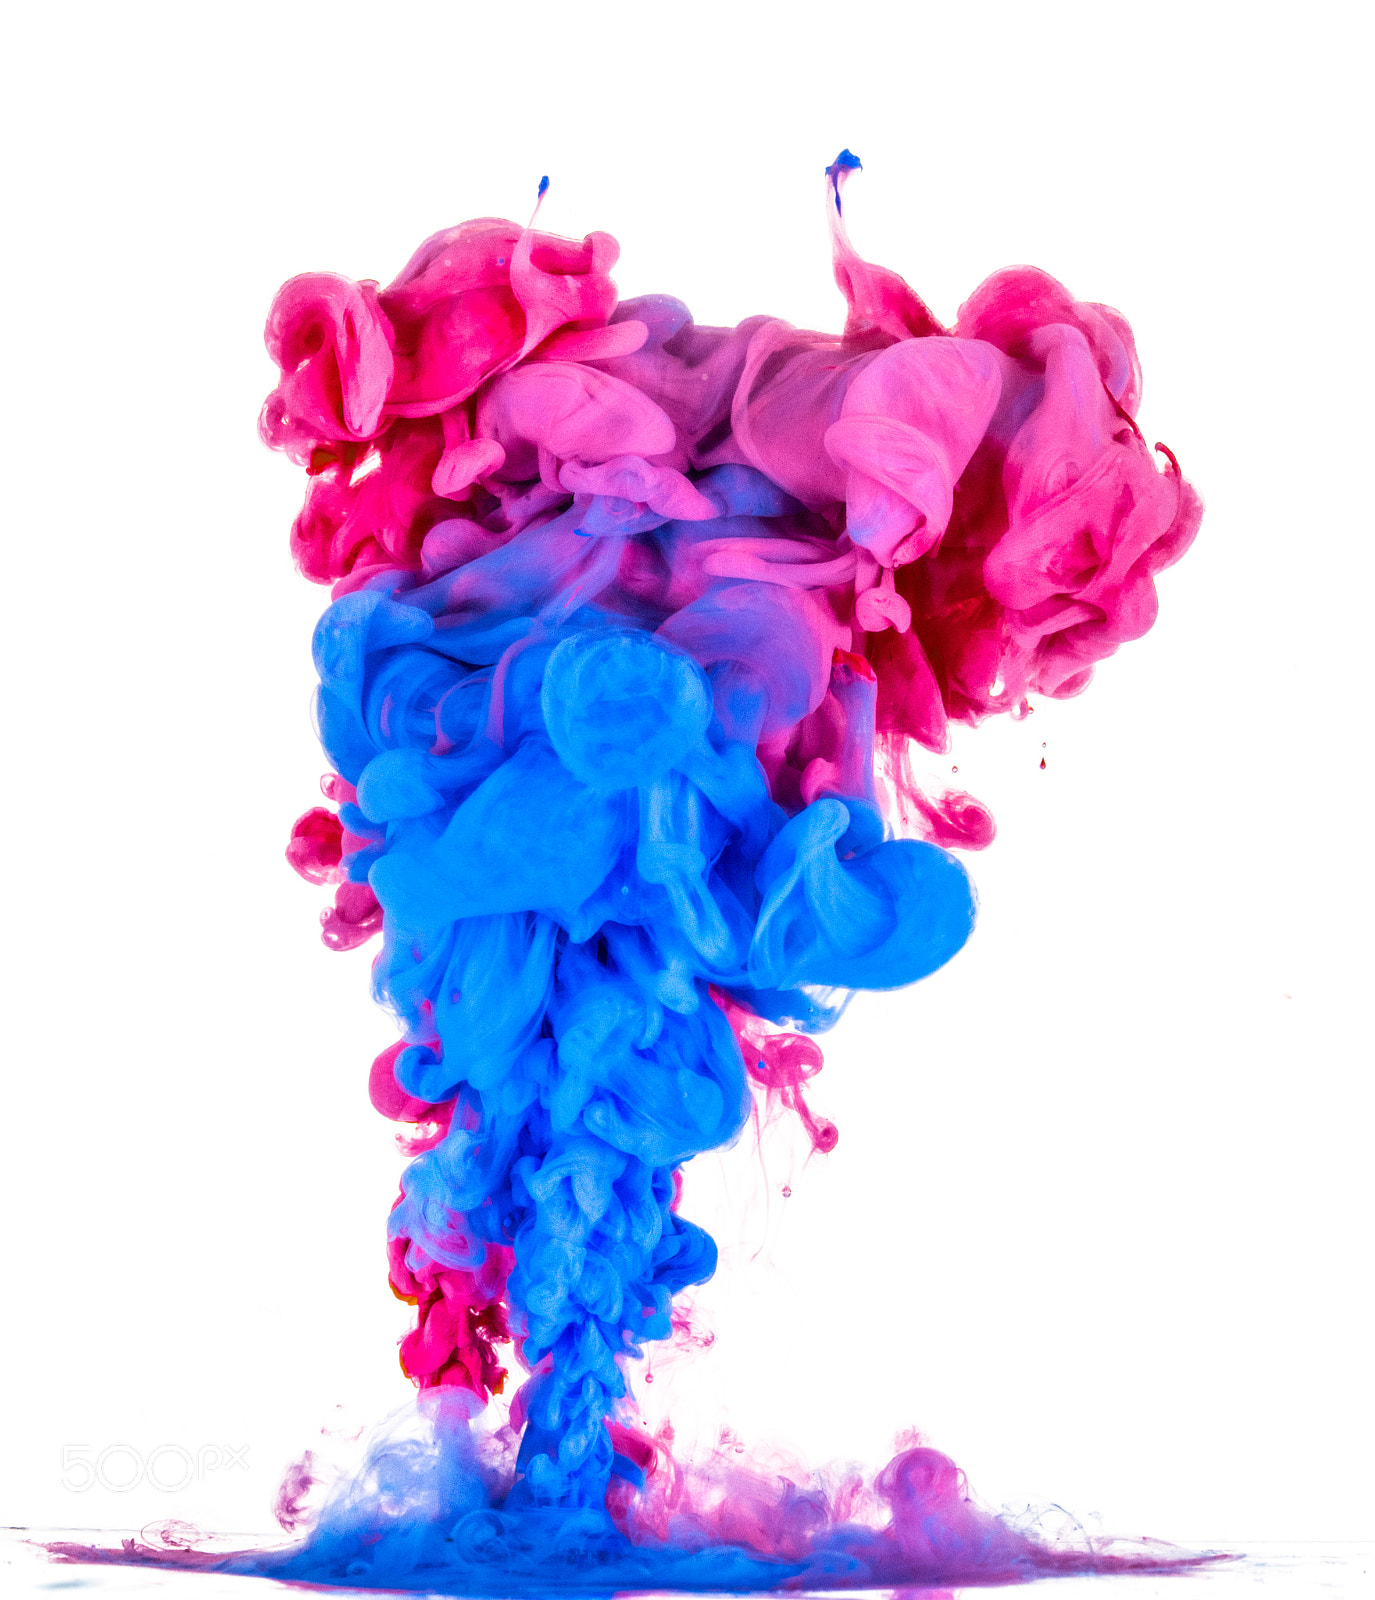 Nikon D5 + Sigma 150mm F2.8 EX DG OS Macro HSM sample photo. Abstract red and blue  paint cloud photography